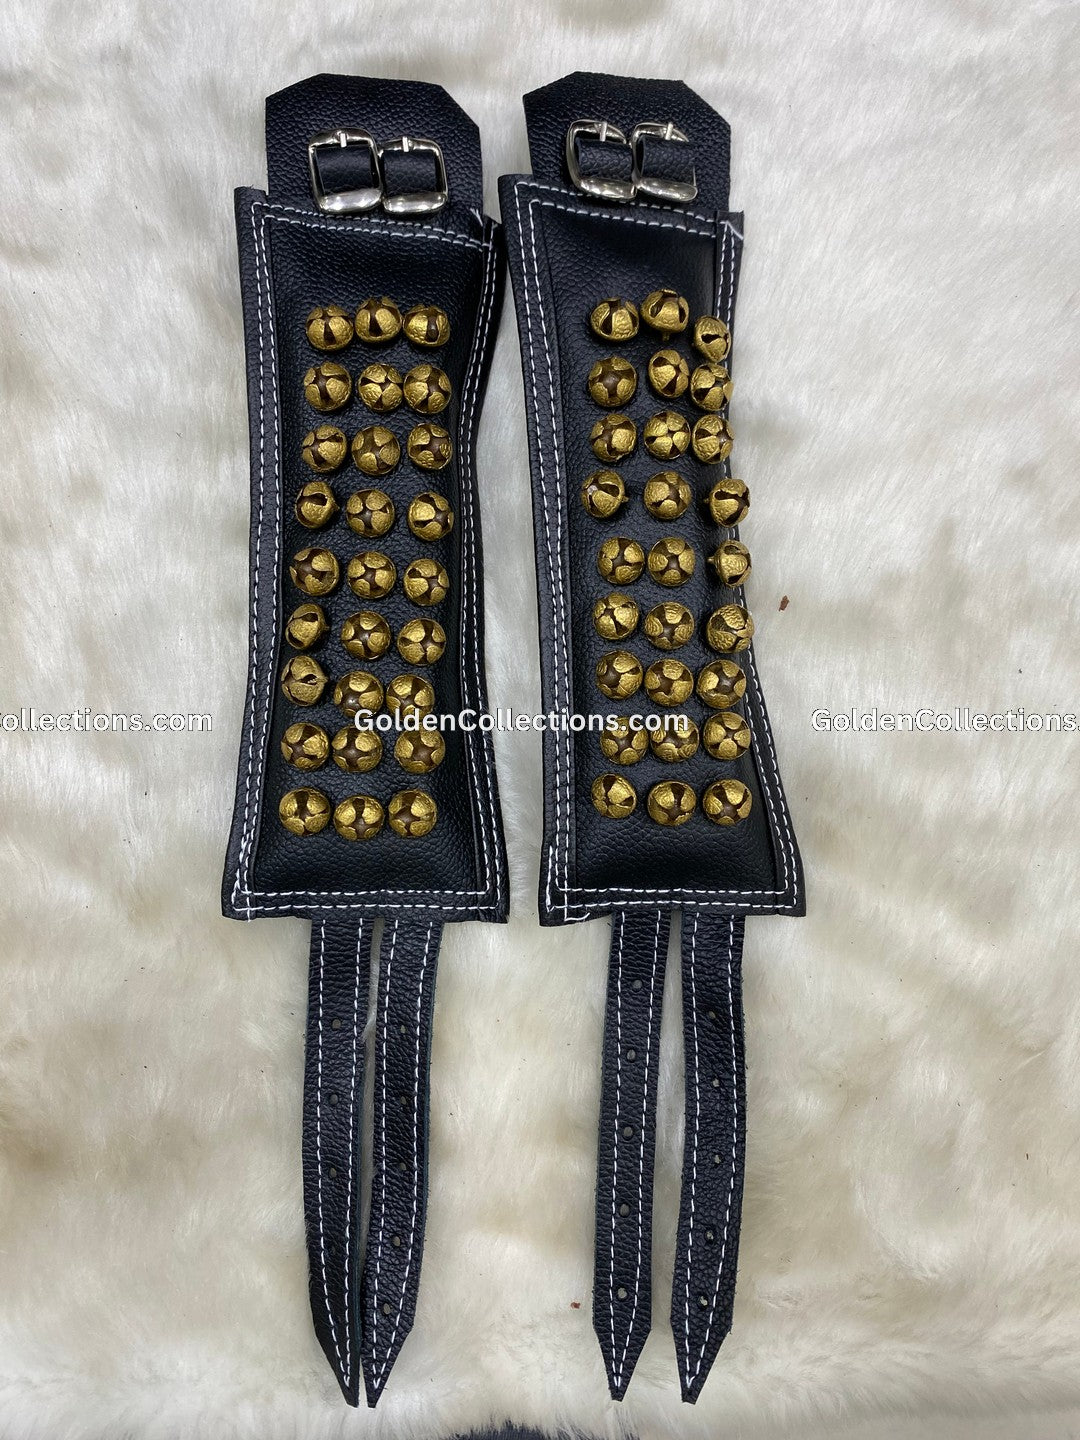 3-Line-Black-Leather-Ghungroo-Salangai-GoldenCollections-1